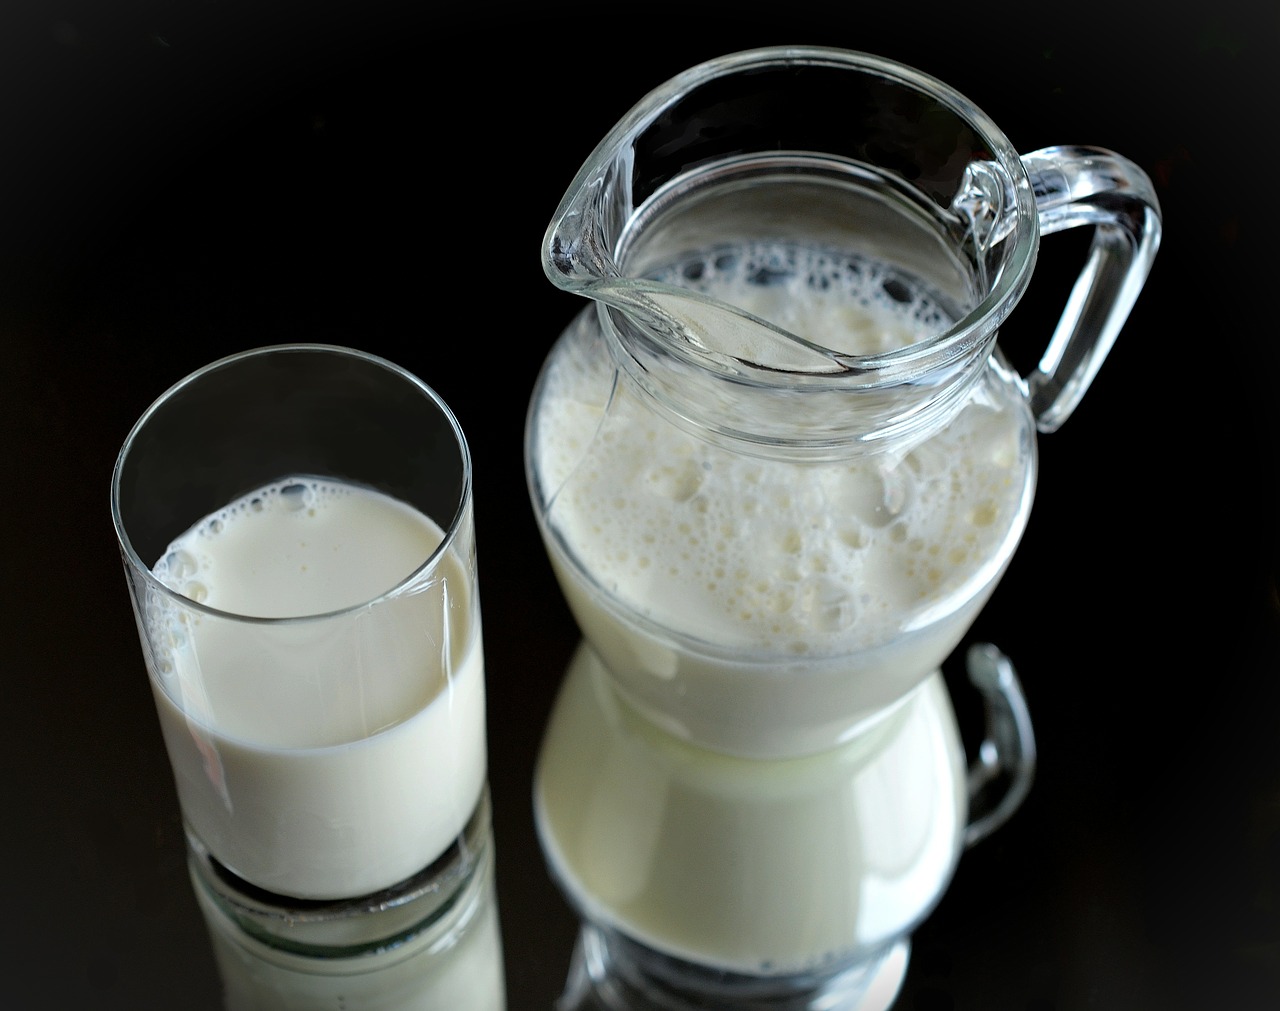 A glass of milk and a milk pitcher